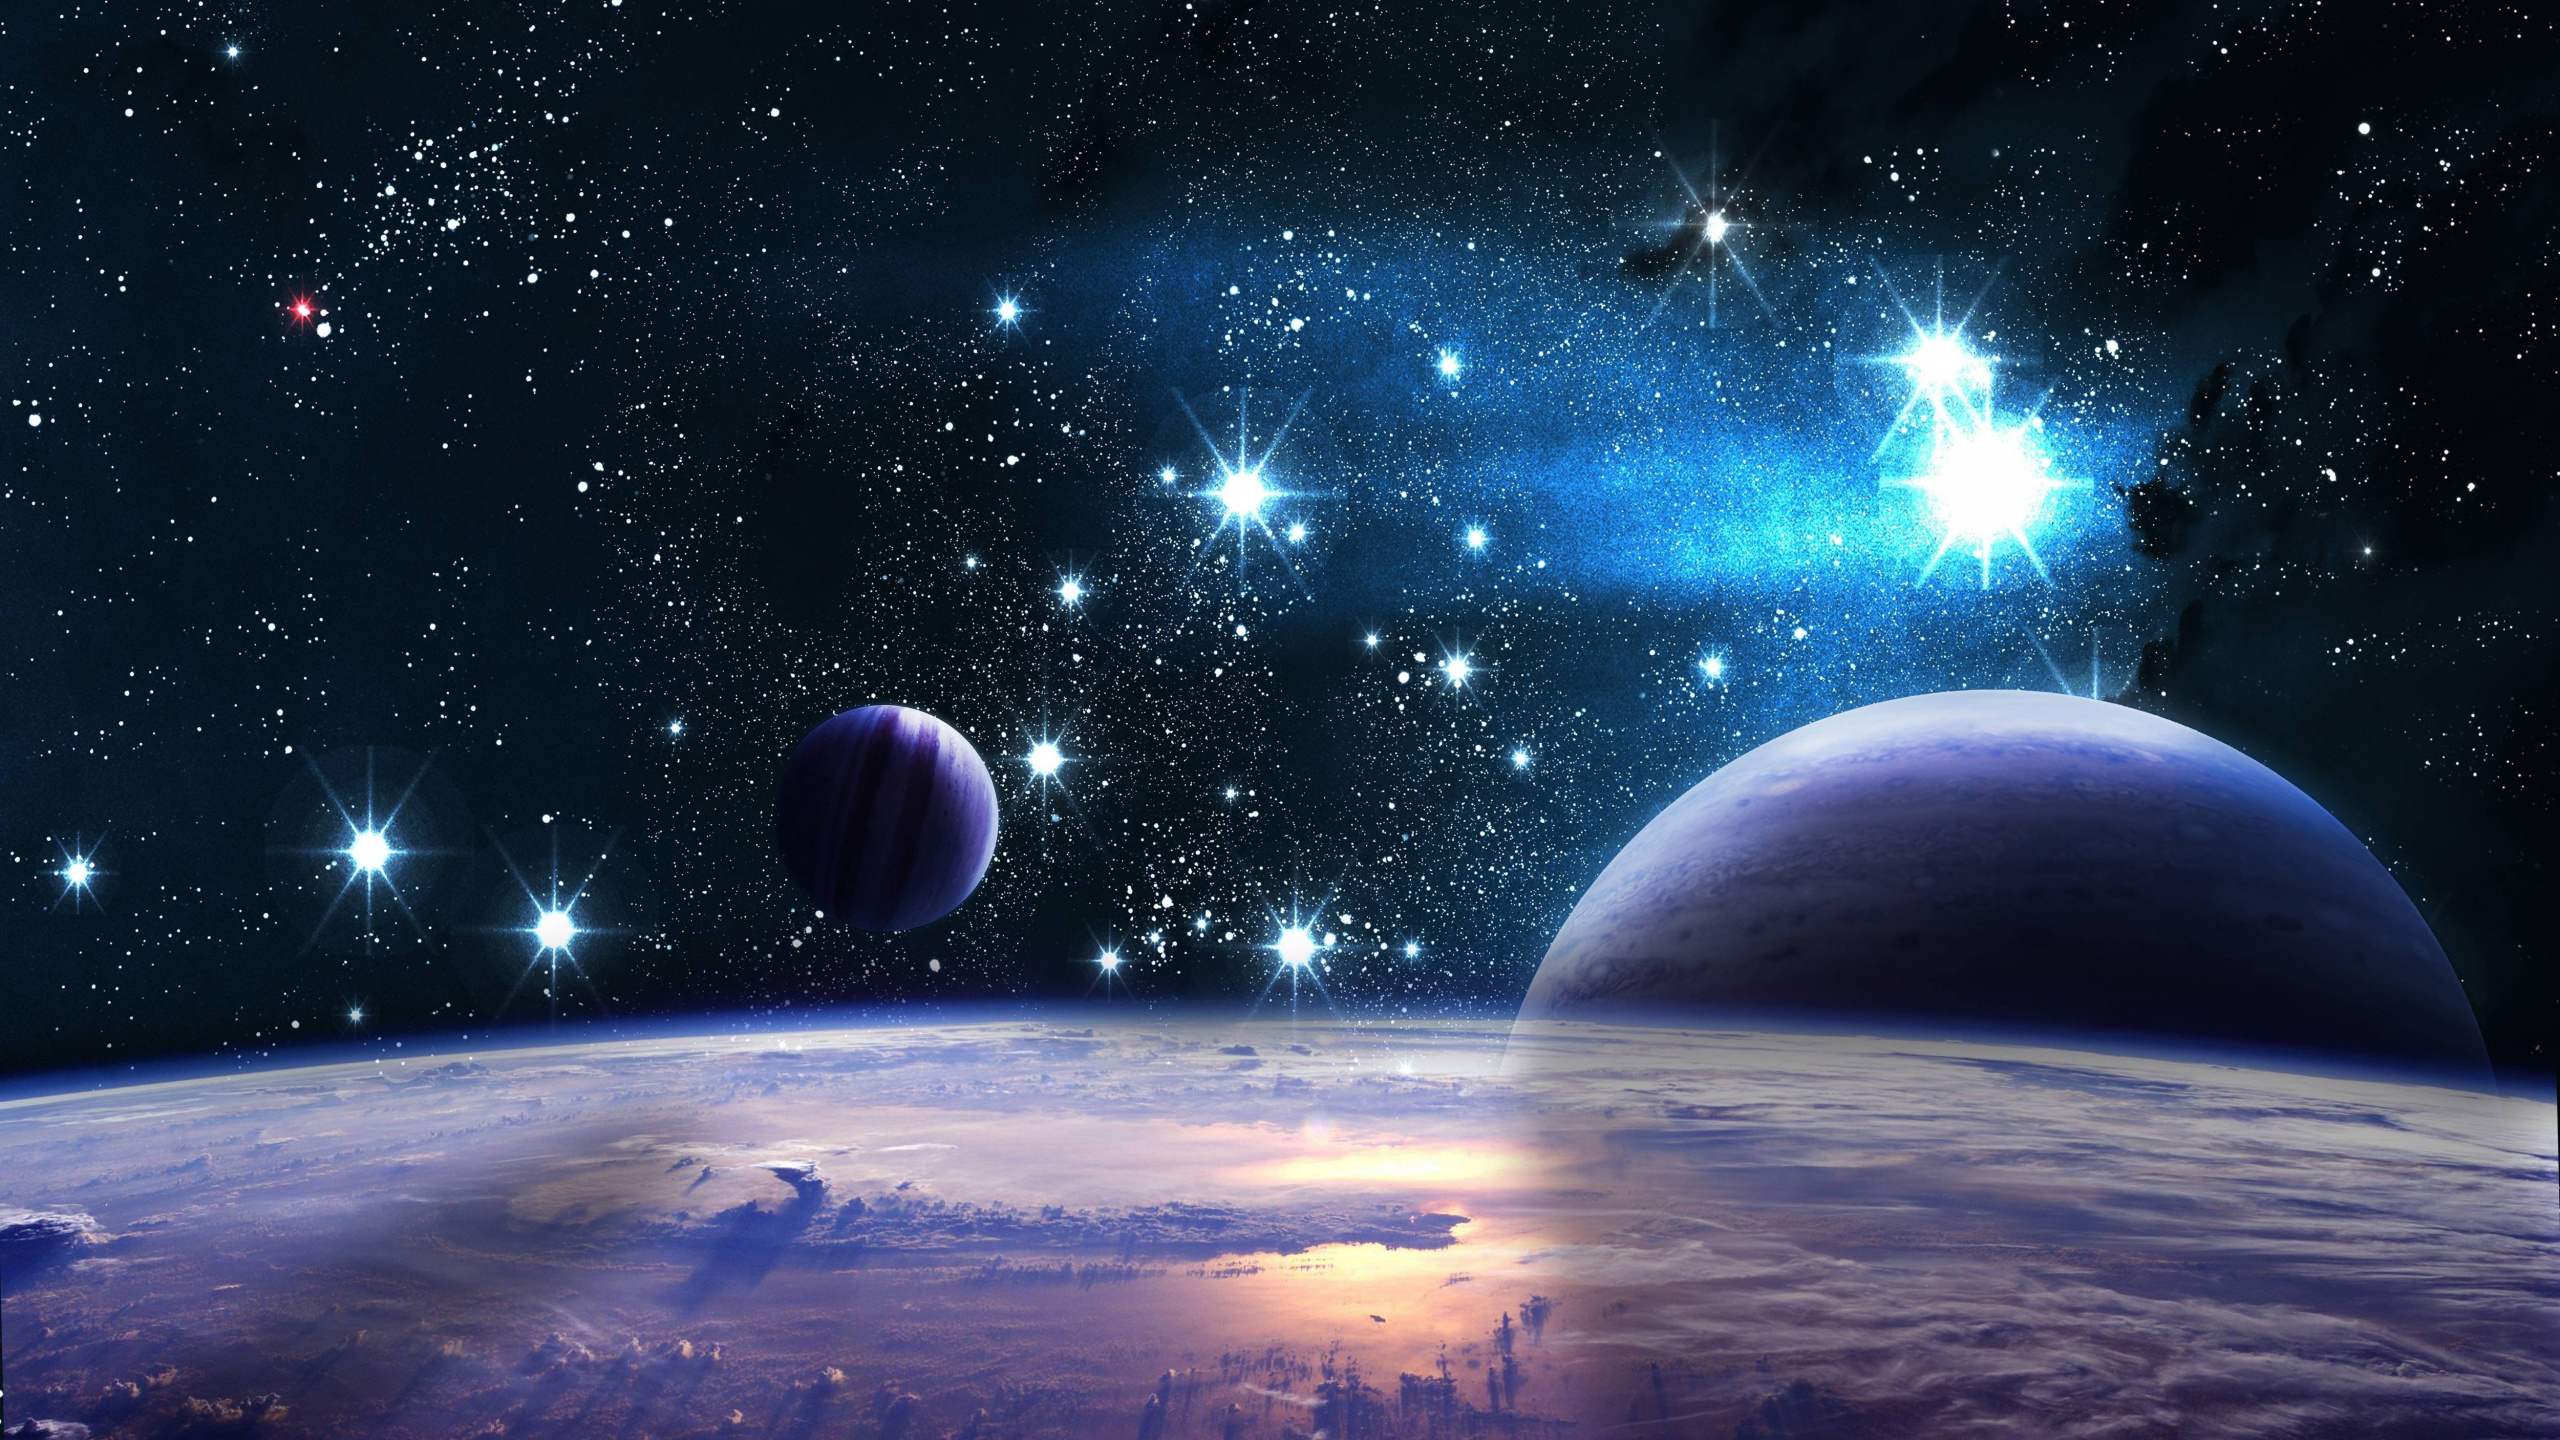 Blue and White Planet With Stars. Wallpaper in 2560x1440 Resolution